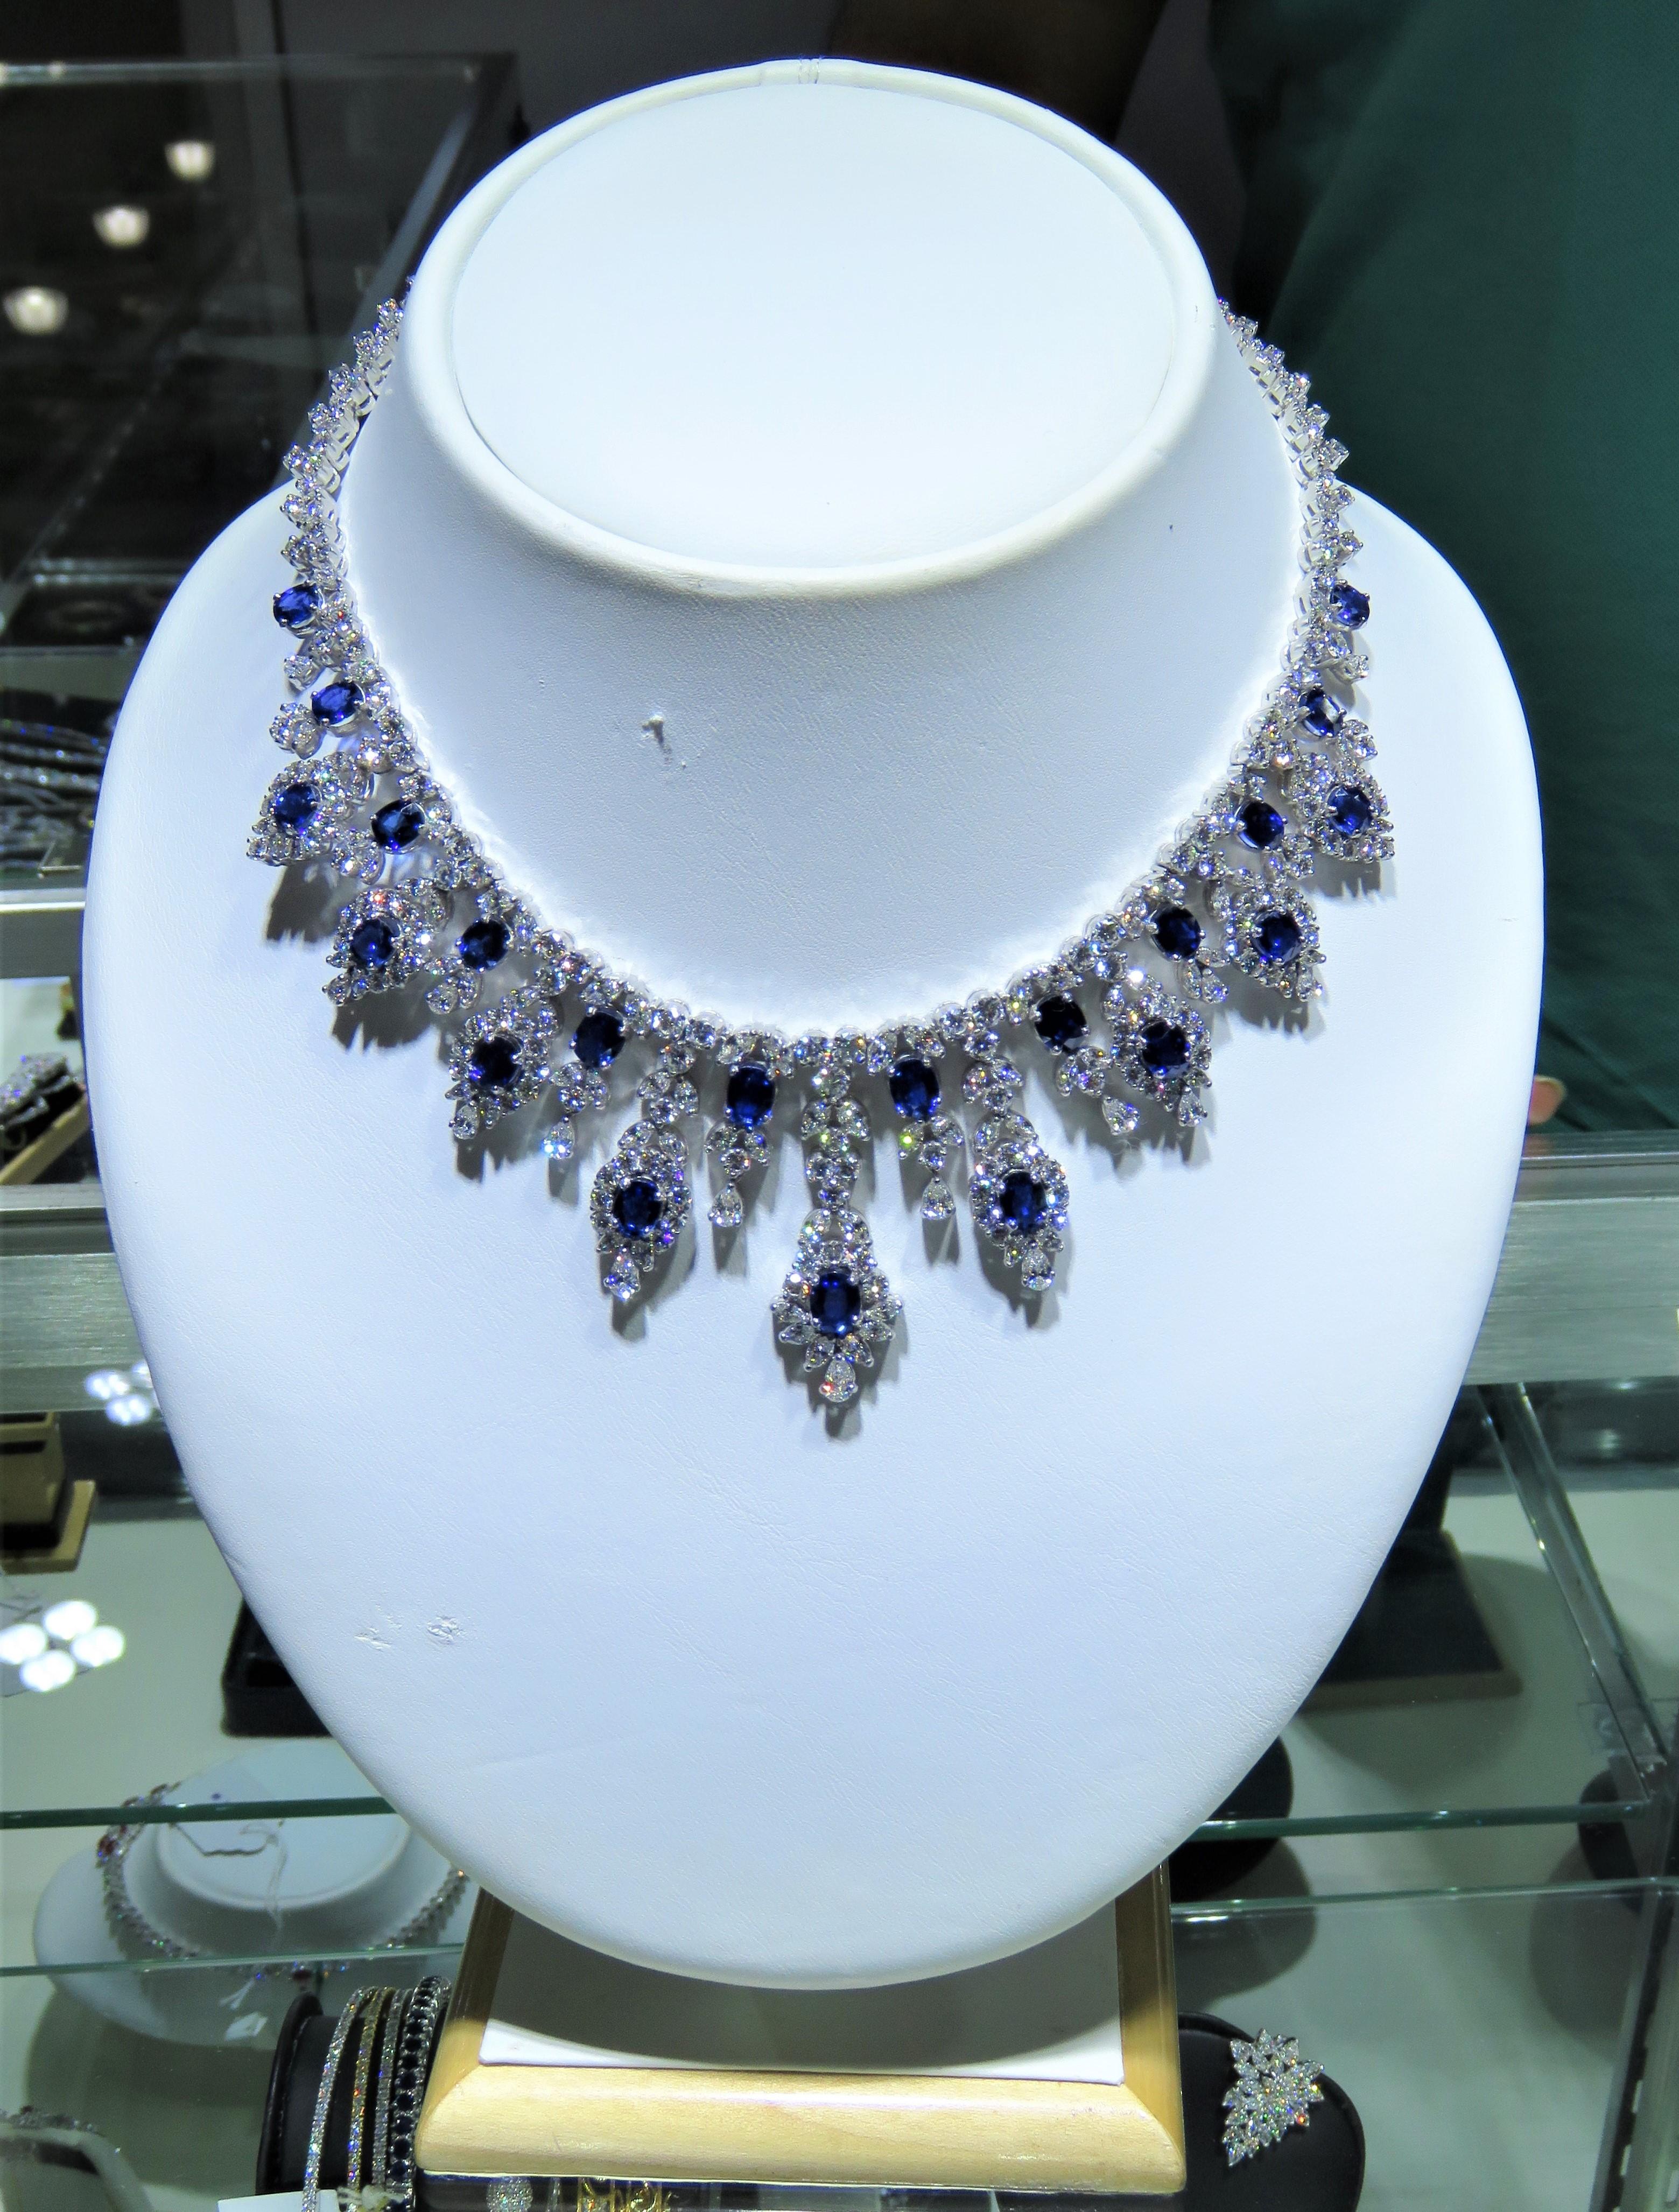 The Following Item we are offering is this Rare Important Radiant 18KT Gold Gorgeous Glittering and Sparkling Magnificent Fancy Sapphires and Diamond Fringe Necklace. Necklace contains approx 52CTS of Beautiful Rare Fancy Ceylon Sapphires and